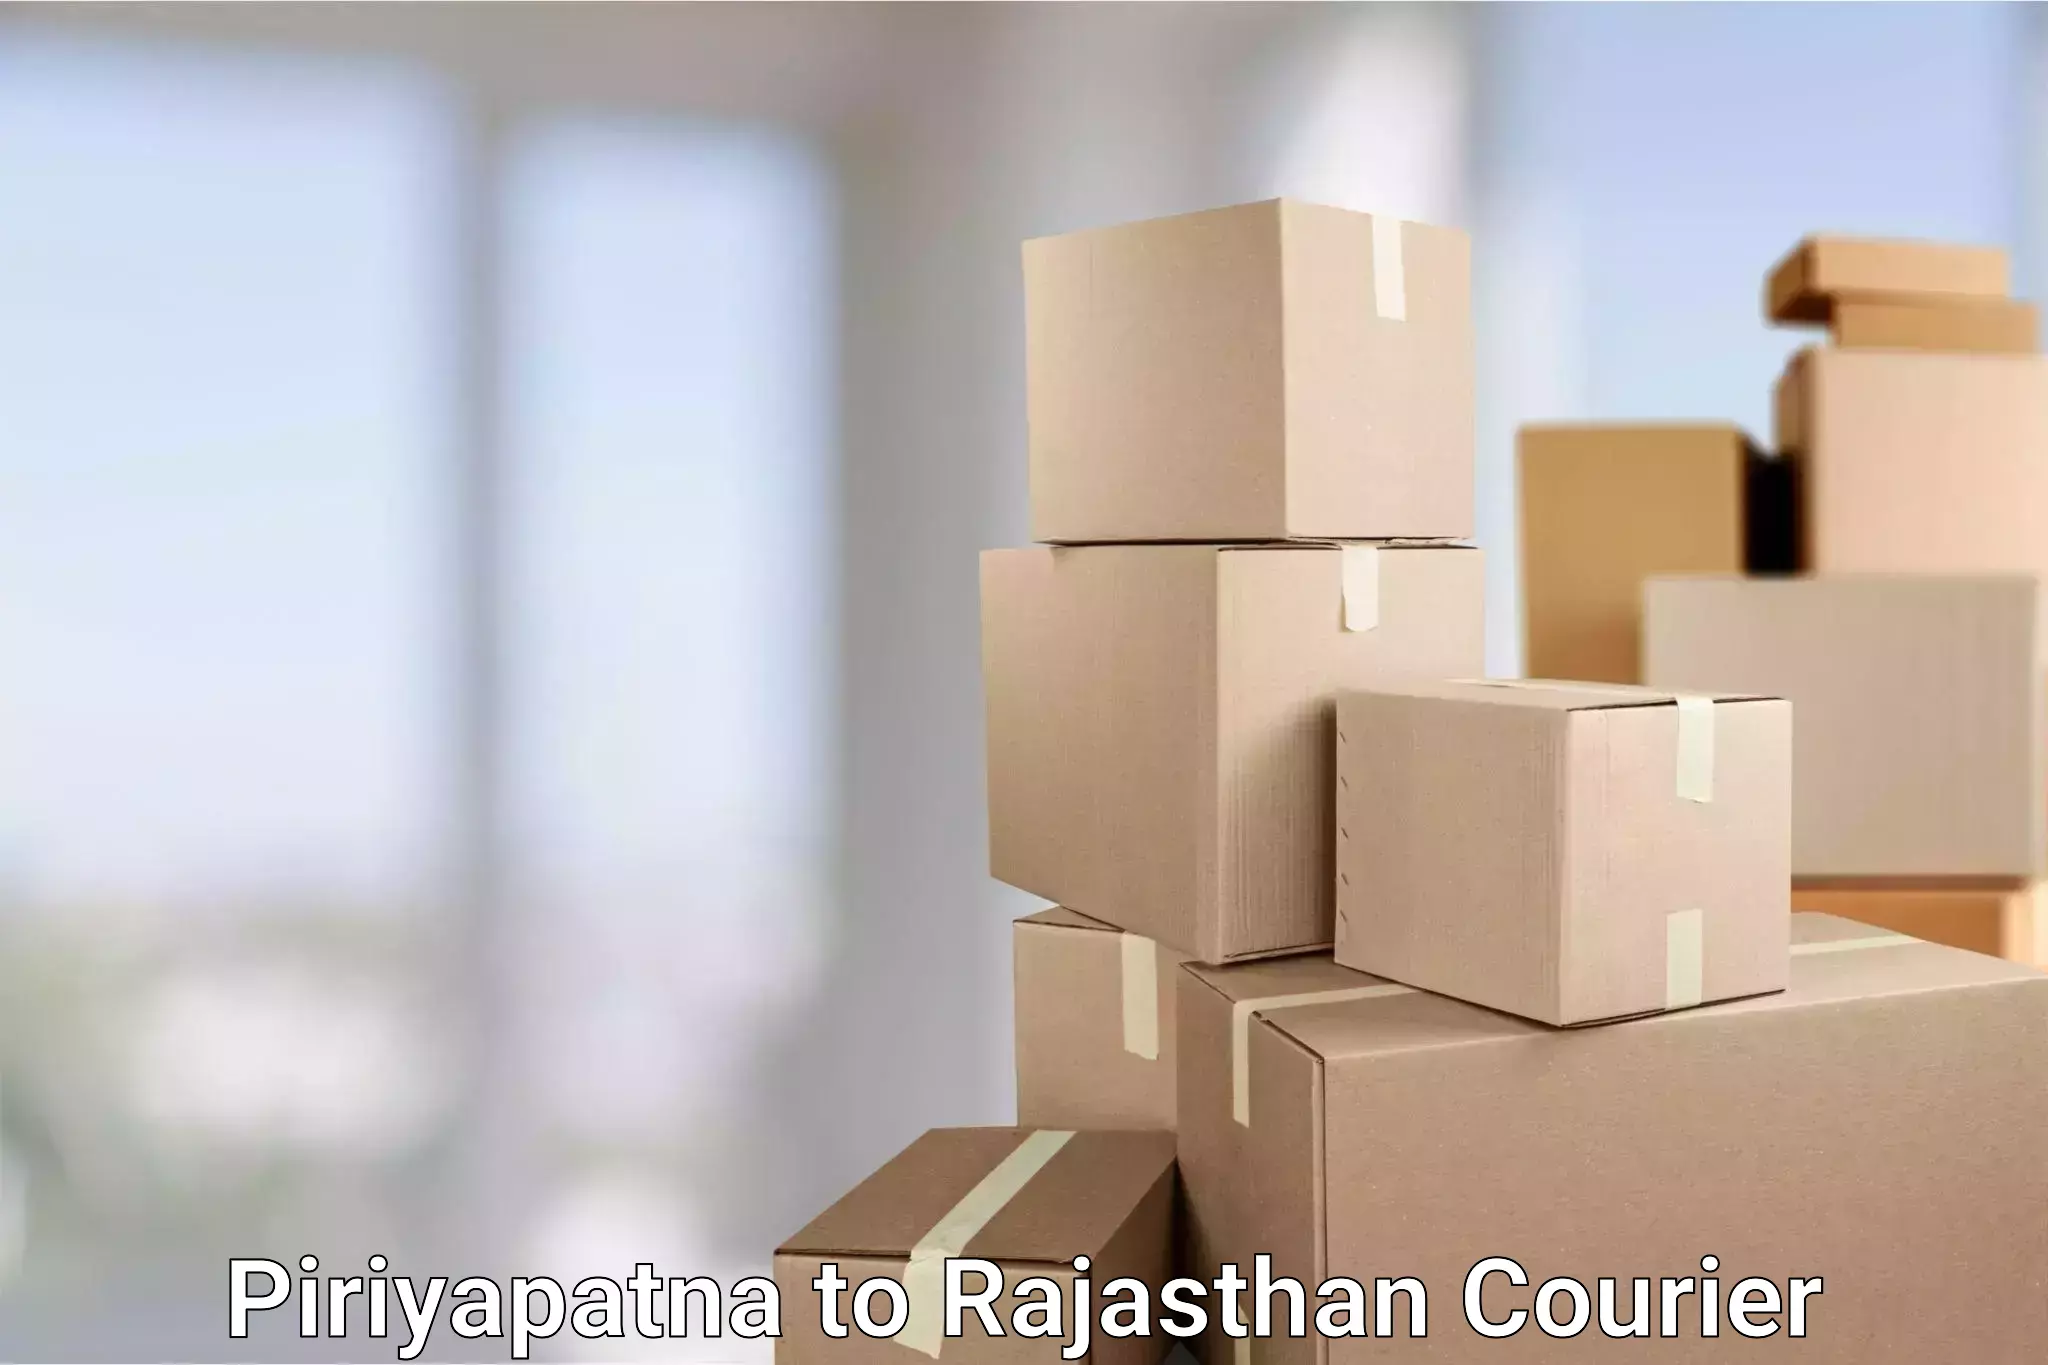 Pharmaceutical courier Piriyapatna to Piparcity